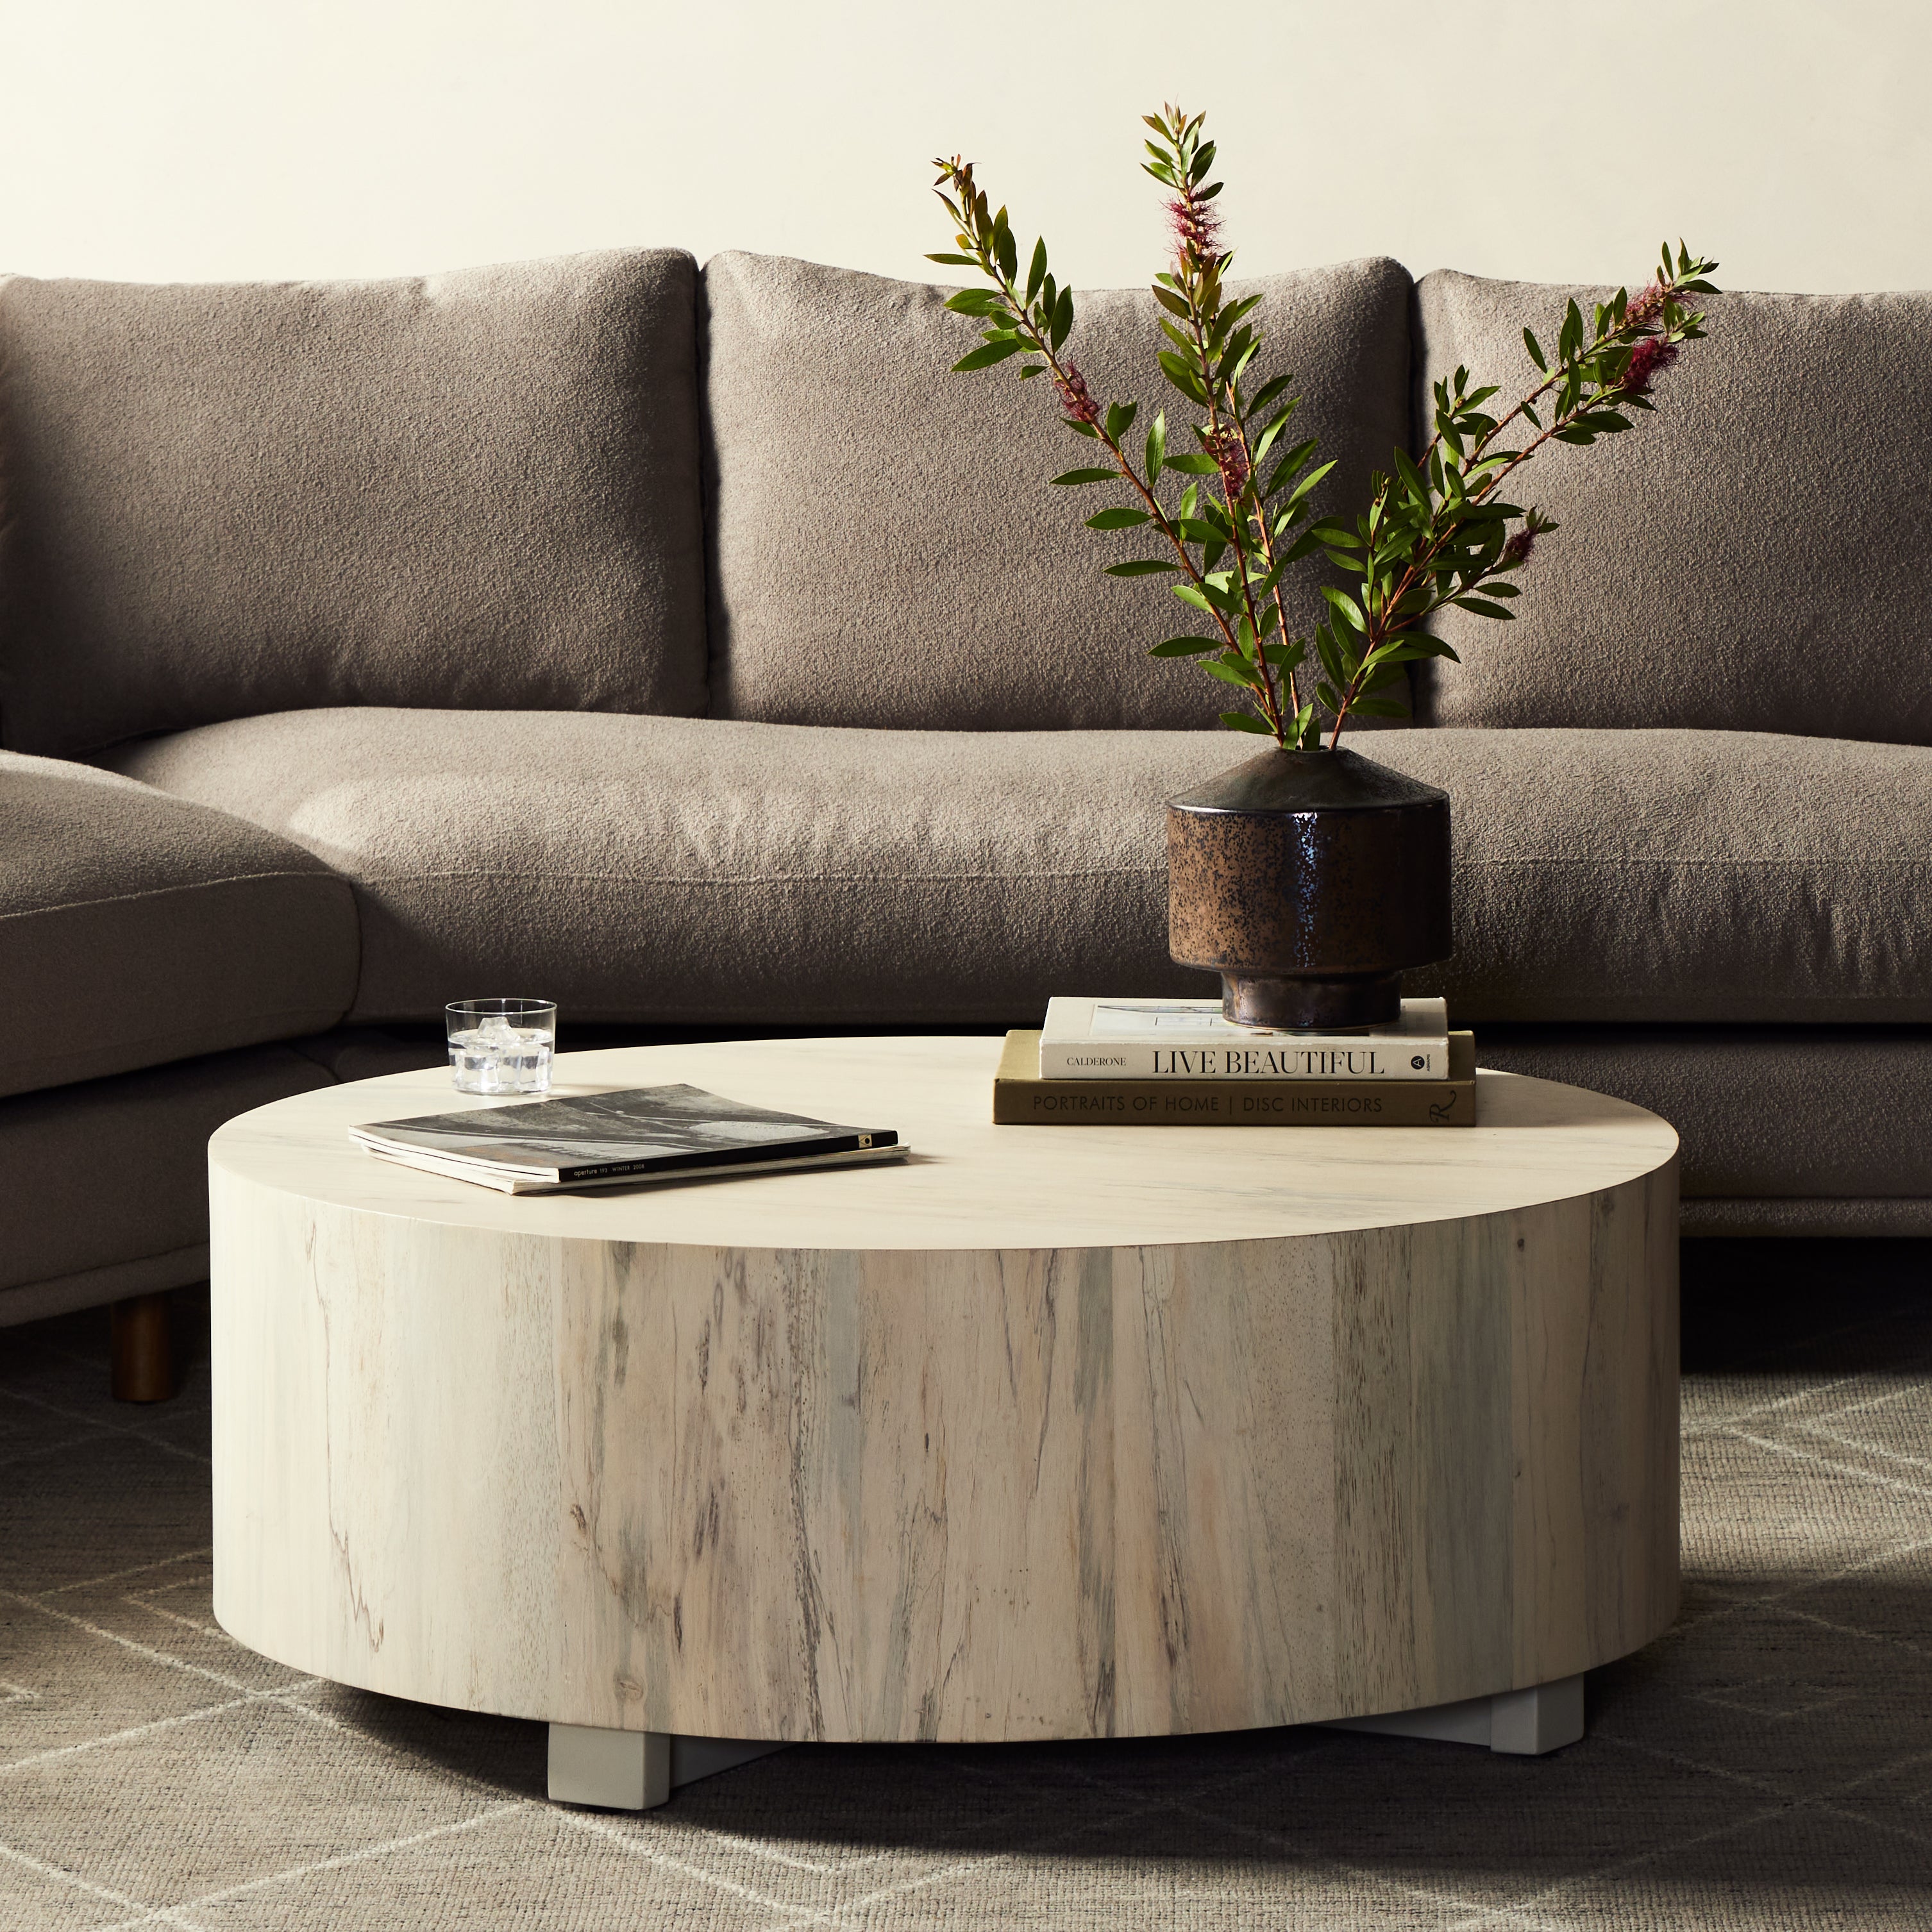 Stunning forces of nature are captured in a coffee table, as spalted primavera wood is hand-shaped into a cylindrical silhouette and finished in a white hue. Reflective of woods' natural character, a slight color variance is possible. Amethyst Home provides interior design, new construction, custom furniture, and area rugs in the Omaha metro area.